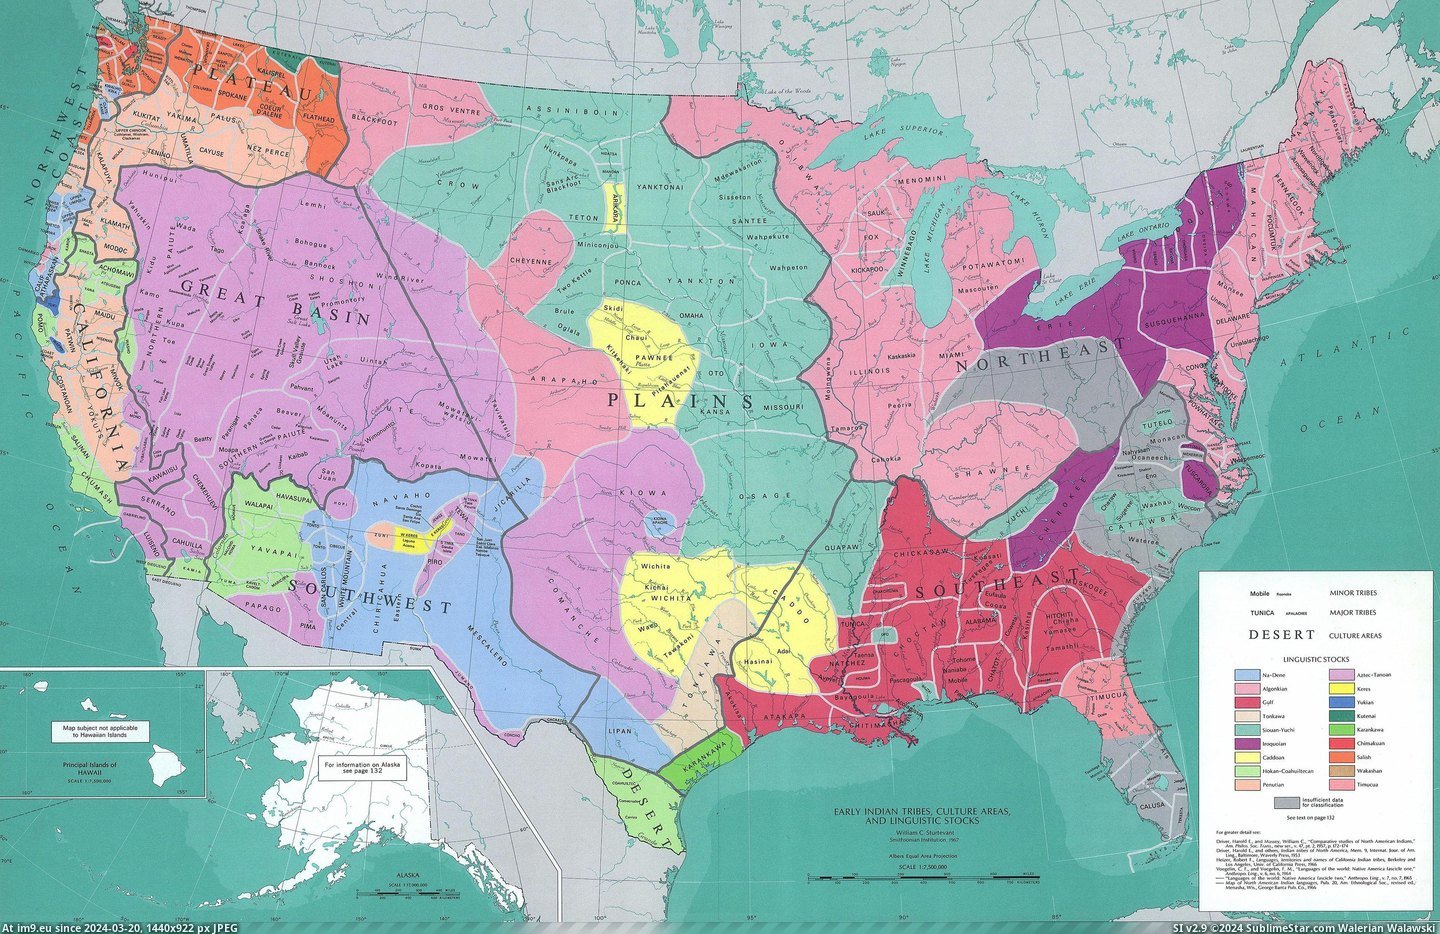 #Early #Americans #Native #Usa [Mapporn] Early Localizations - Native Americans - USA [3850x2476] Pic. (Image of album My r/MAPS favs))